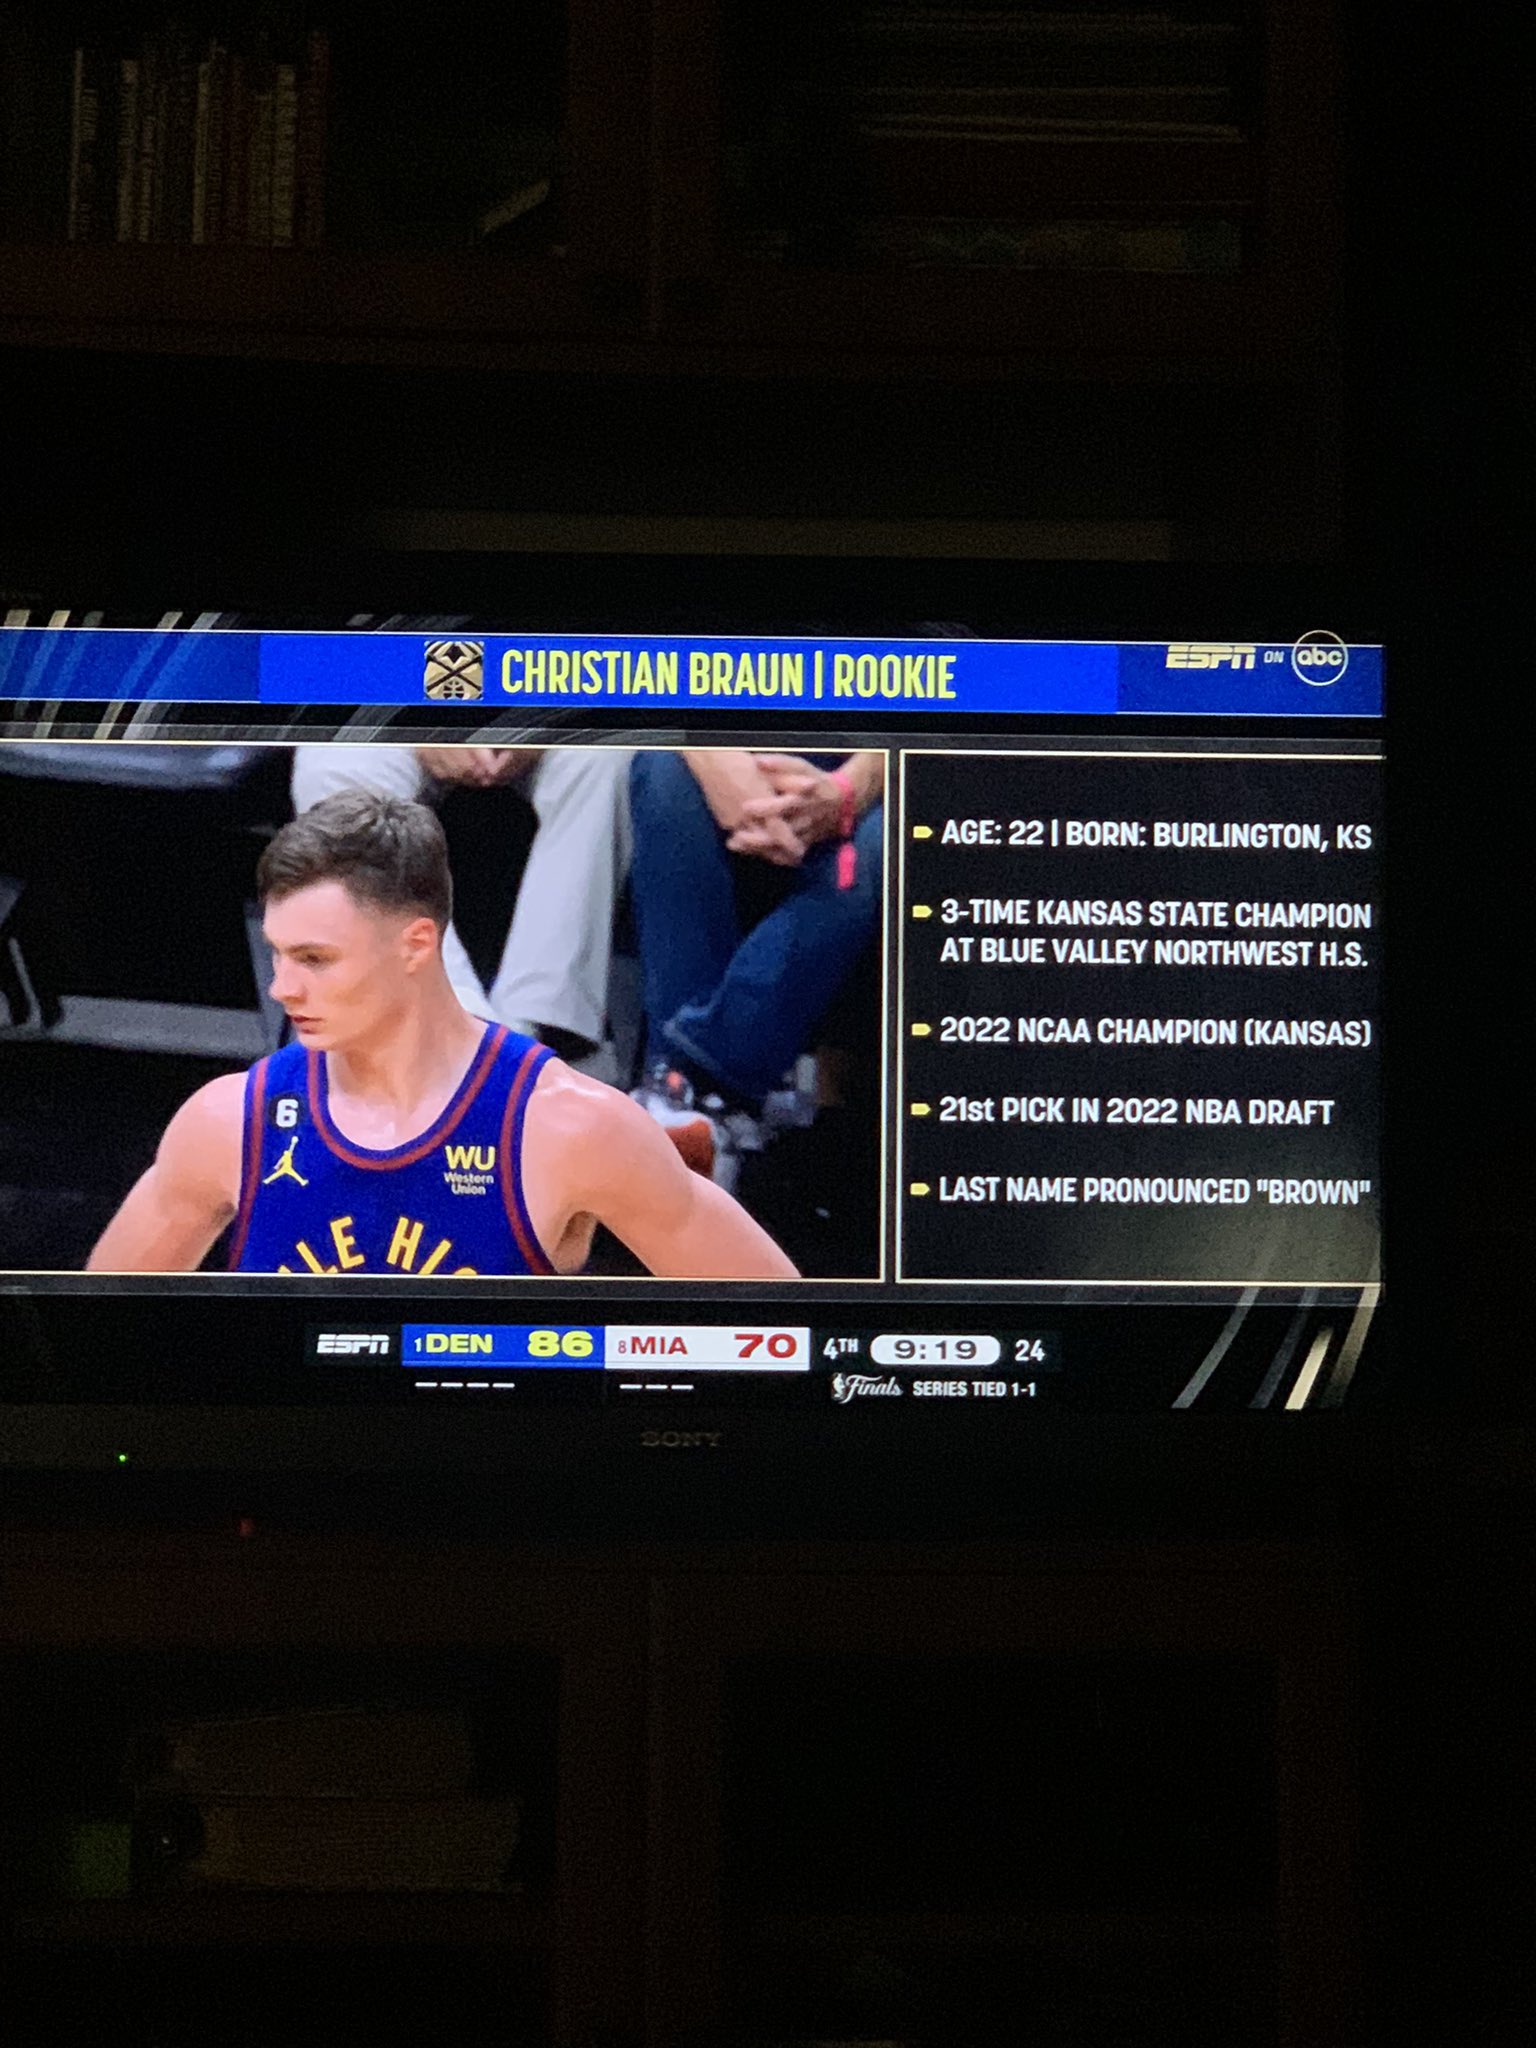 Lexi on Twitter: Pretty cool to see my high school alma matter listed  during the NBA finals! Christian Braun making us proud! 🔥   / Twitter